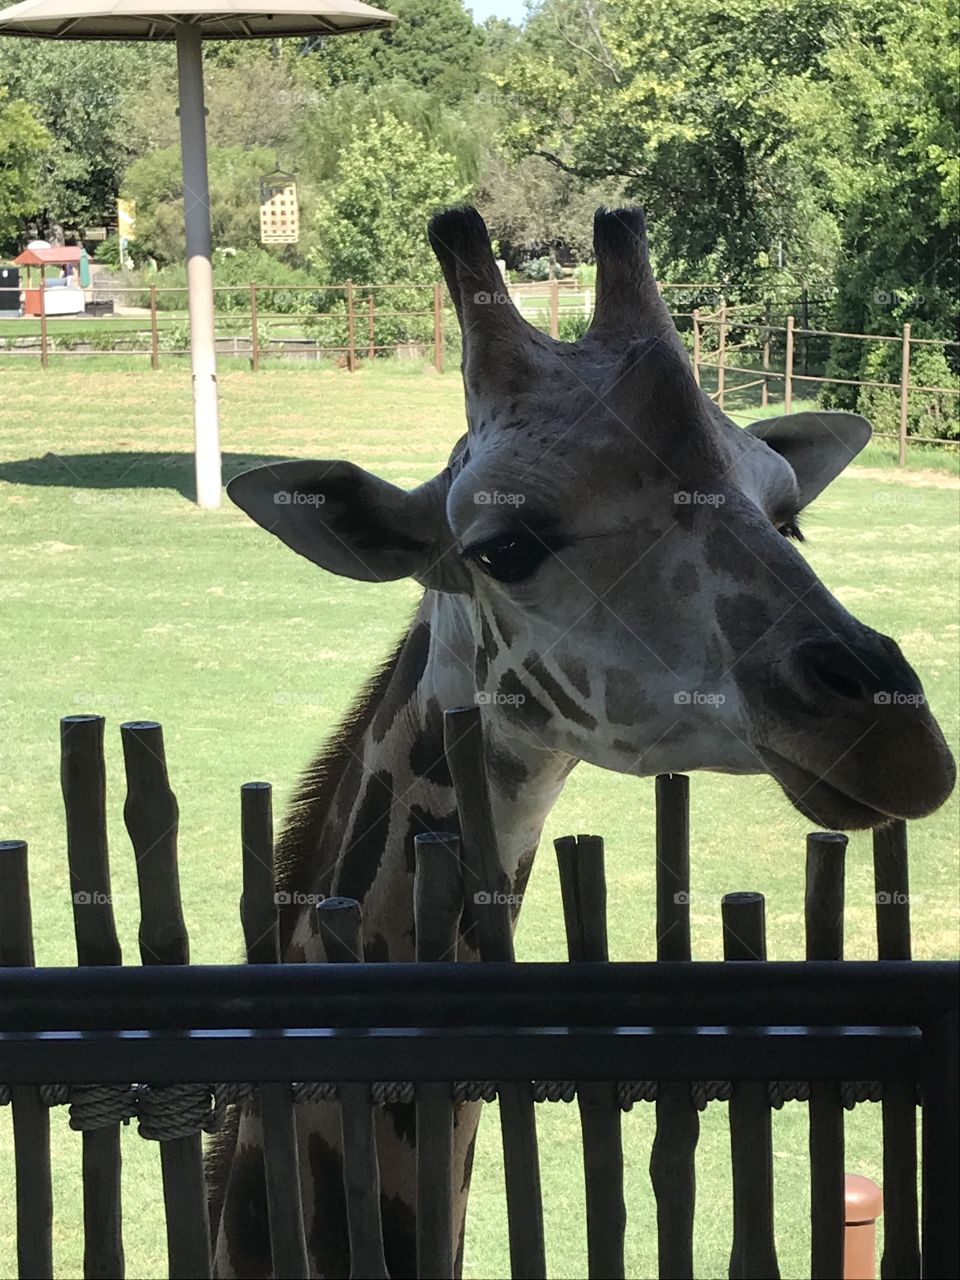 Giraffe, here’s looking at you kid